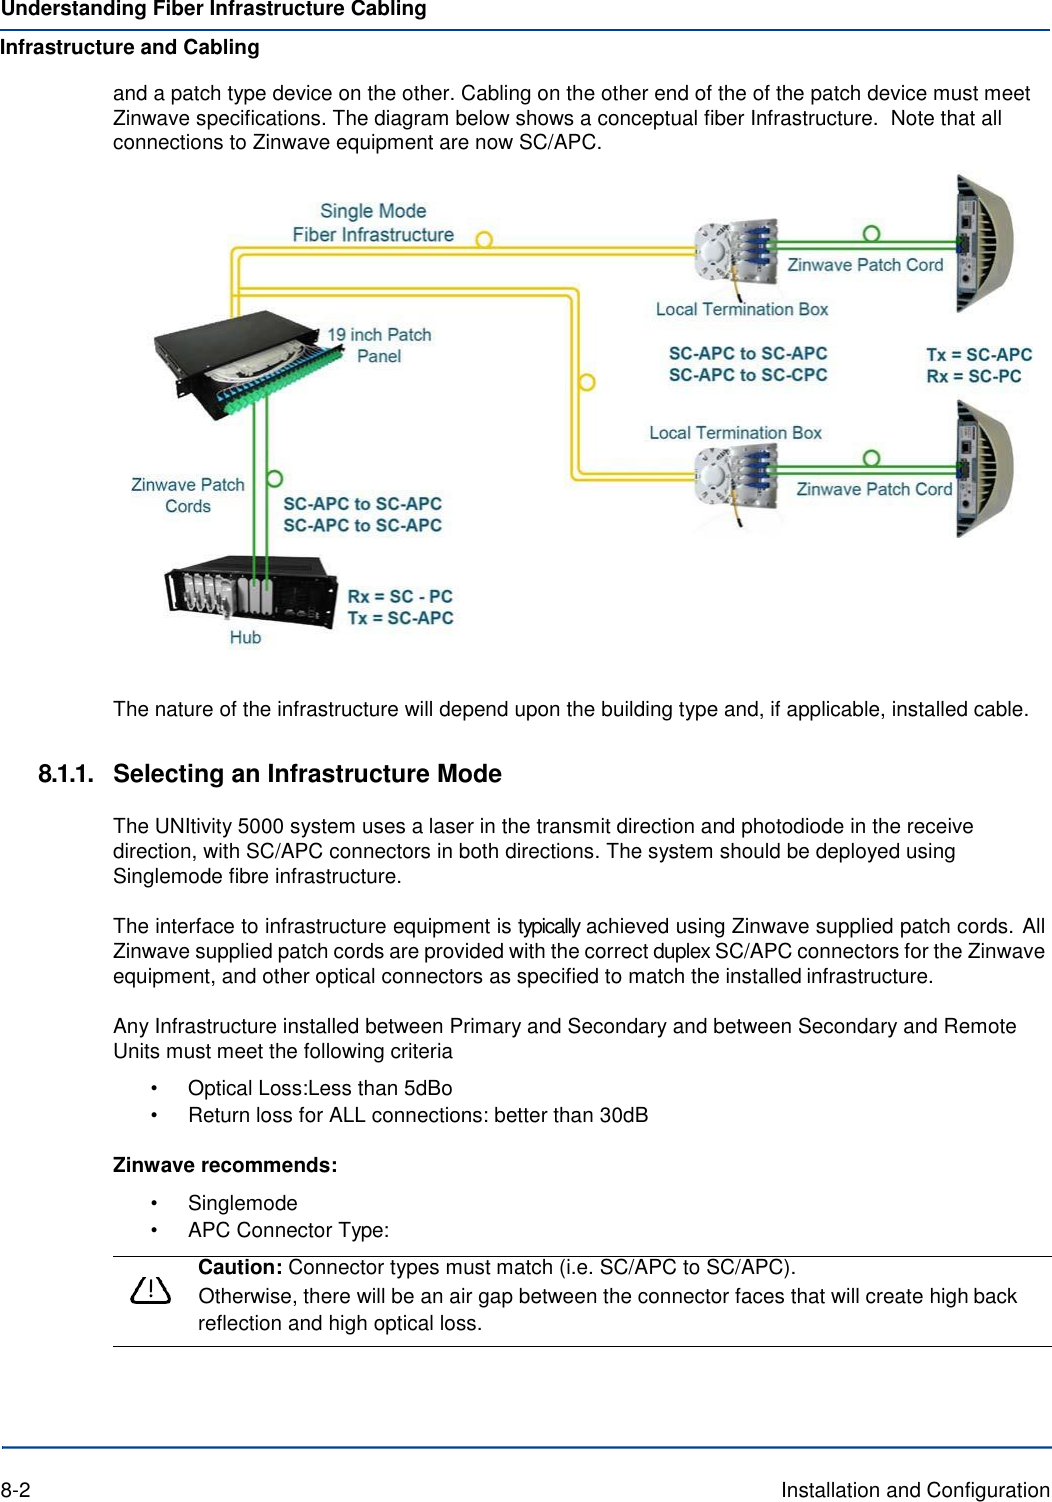 Understanding Fiber Infrastructure Cabling Infrastructure and Cabling and a patch type device on the other. Cabling on the other end of the of the patch device must meet Zinwave specifications. The diagram below shows a conceptual fiber Infrastructure.  Note that all connections to Zinwave equipment are now SC/APC.    The nature of the infrastructure will depend upon the building type and, if applicable, installed cable.  8.1.1.  Selecting an Infrastructure Mode  The UNItivity 5000 system uses a laser in the transmit direction and photodiode in the receive direction, with SC/APC connectors in both directions. The system should be deployed using Singlemode fibre infrastructure.  The interface to infrastructure equipment is typically achieved using Zinwave supplied patch cords. All Zinwave supplied patch cords are provided with the correct duplex SC/APC connectors for the Zinwave equipment, and other optical connectors as specified to match the installed infrastructure.  Any Infrastructure installed between Primary and Secondary and between Secondary and Remote Units must meet the following criteria • Optical Loss:Less than 5dBo • Return loss for ALL connections: better than 30dB  Zinwave recommends: • Singlemode • APC Connector Type:  Caution: Connector types must match (i.e. SC/APC to SC/APC).      Otherwise, there will be an air gap between the connector faces that will create high back reflection and high optical loss.      8-2  Installation and Configuration 